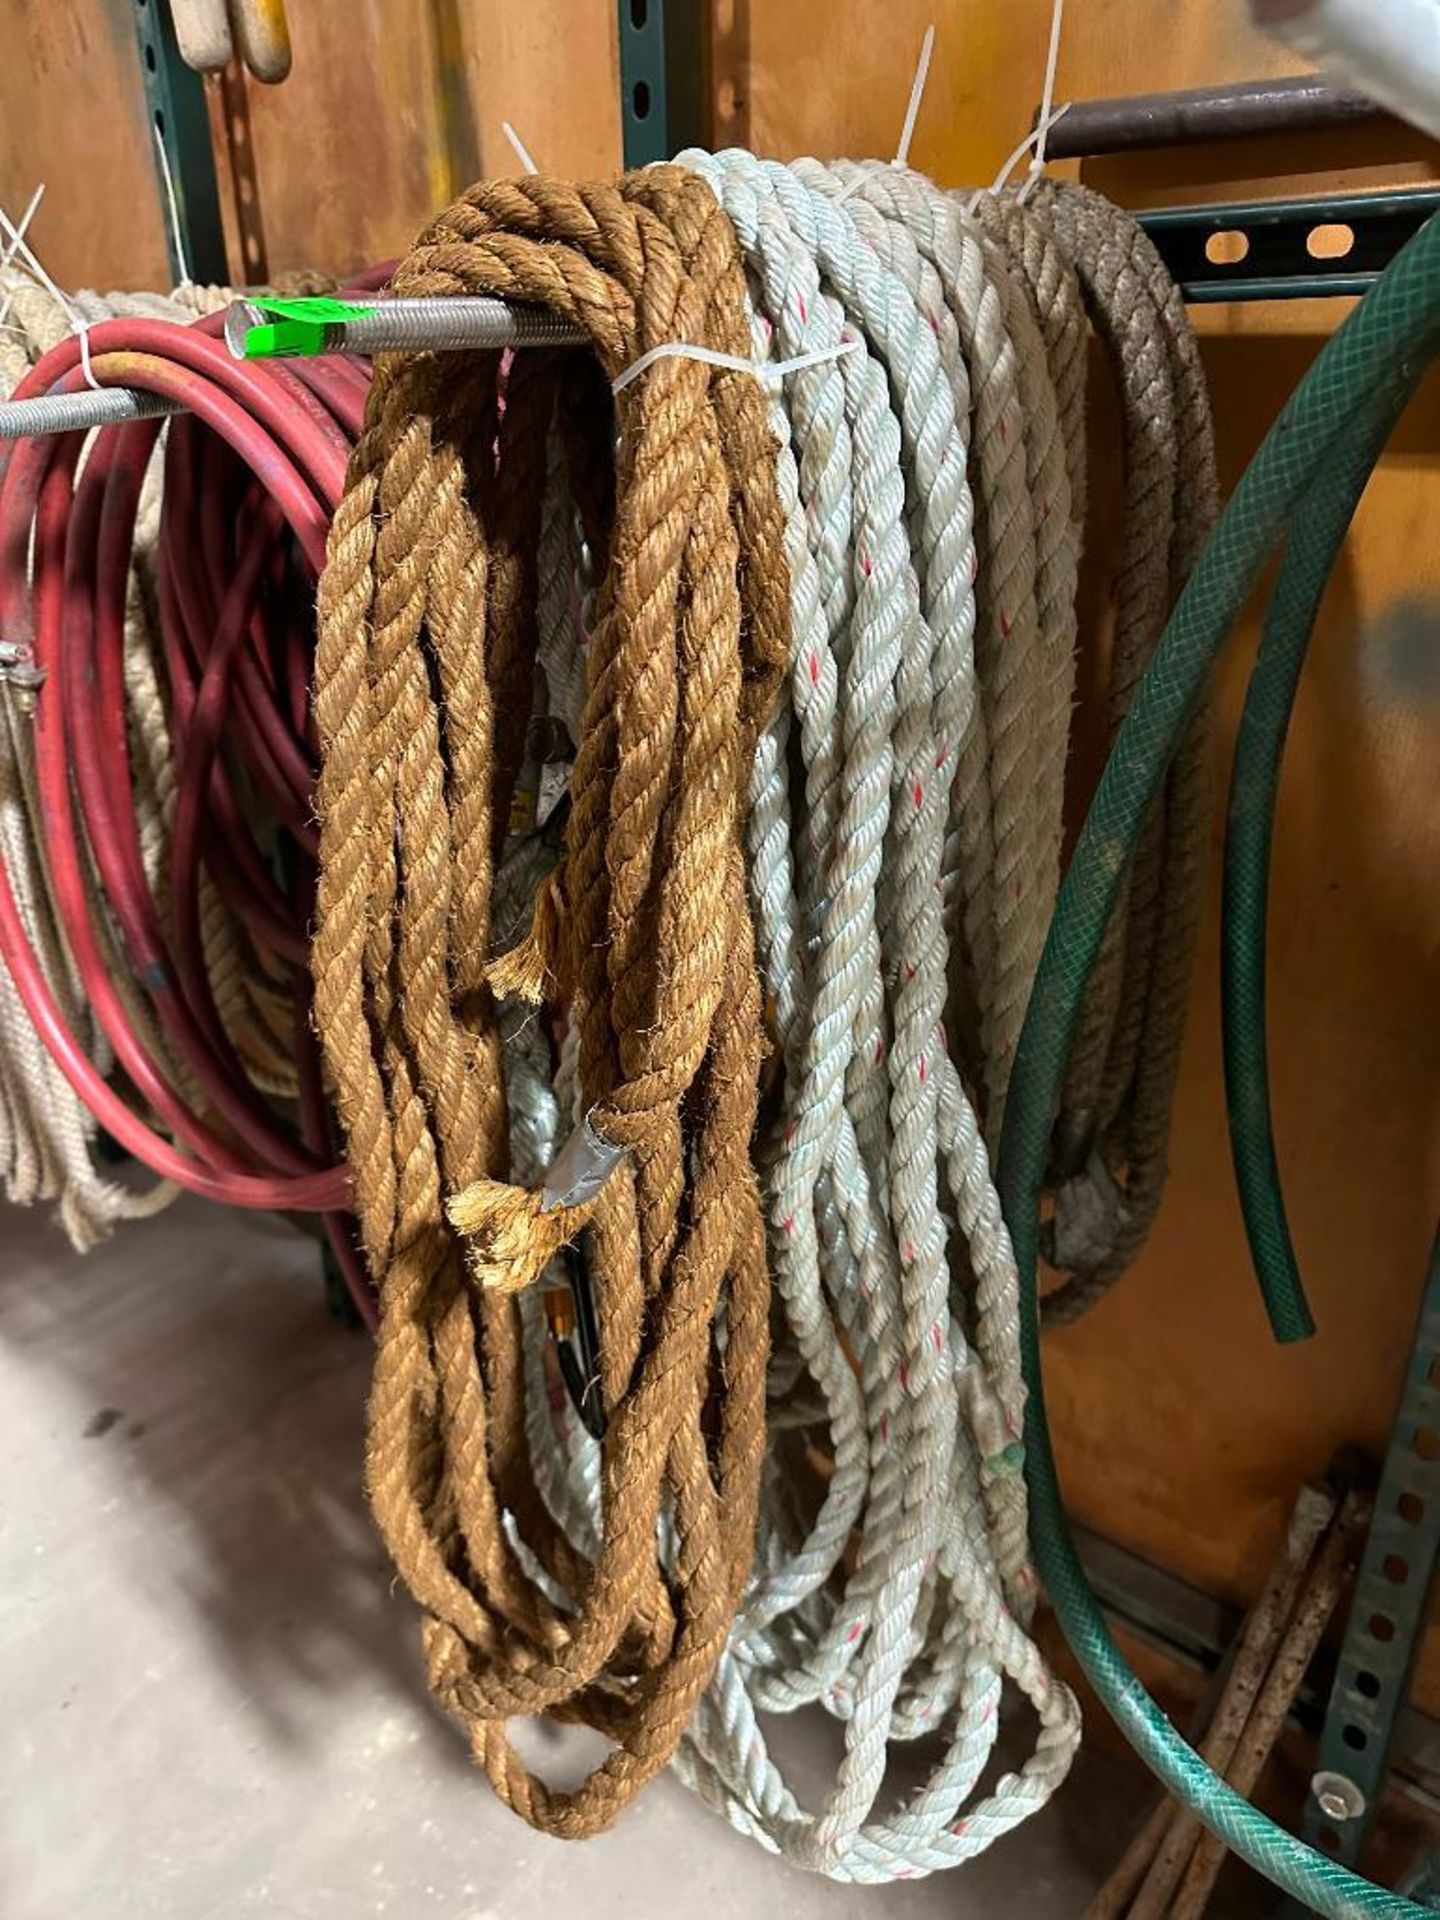 ASSORTED HEAVY DUTY ROPE - Image 3 of 3